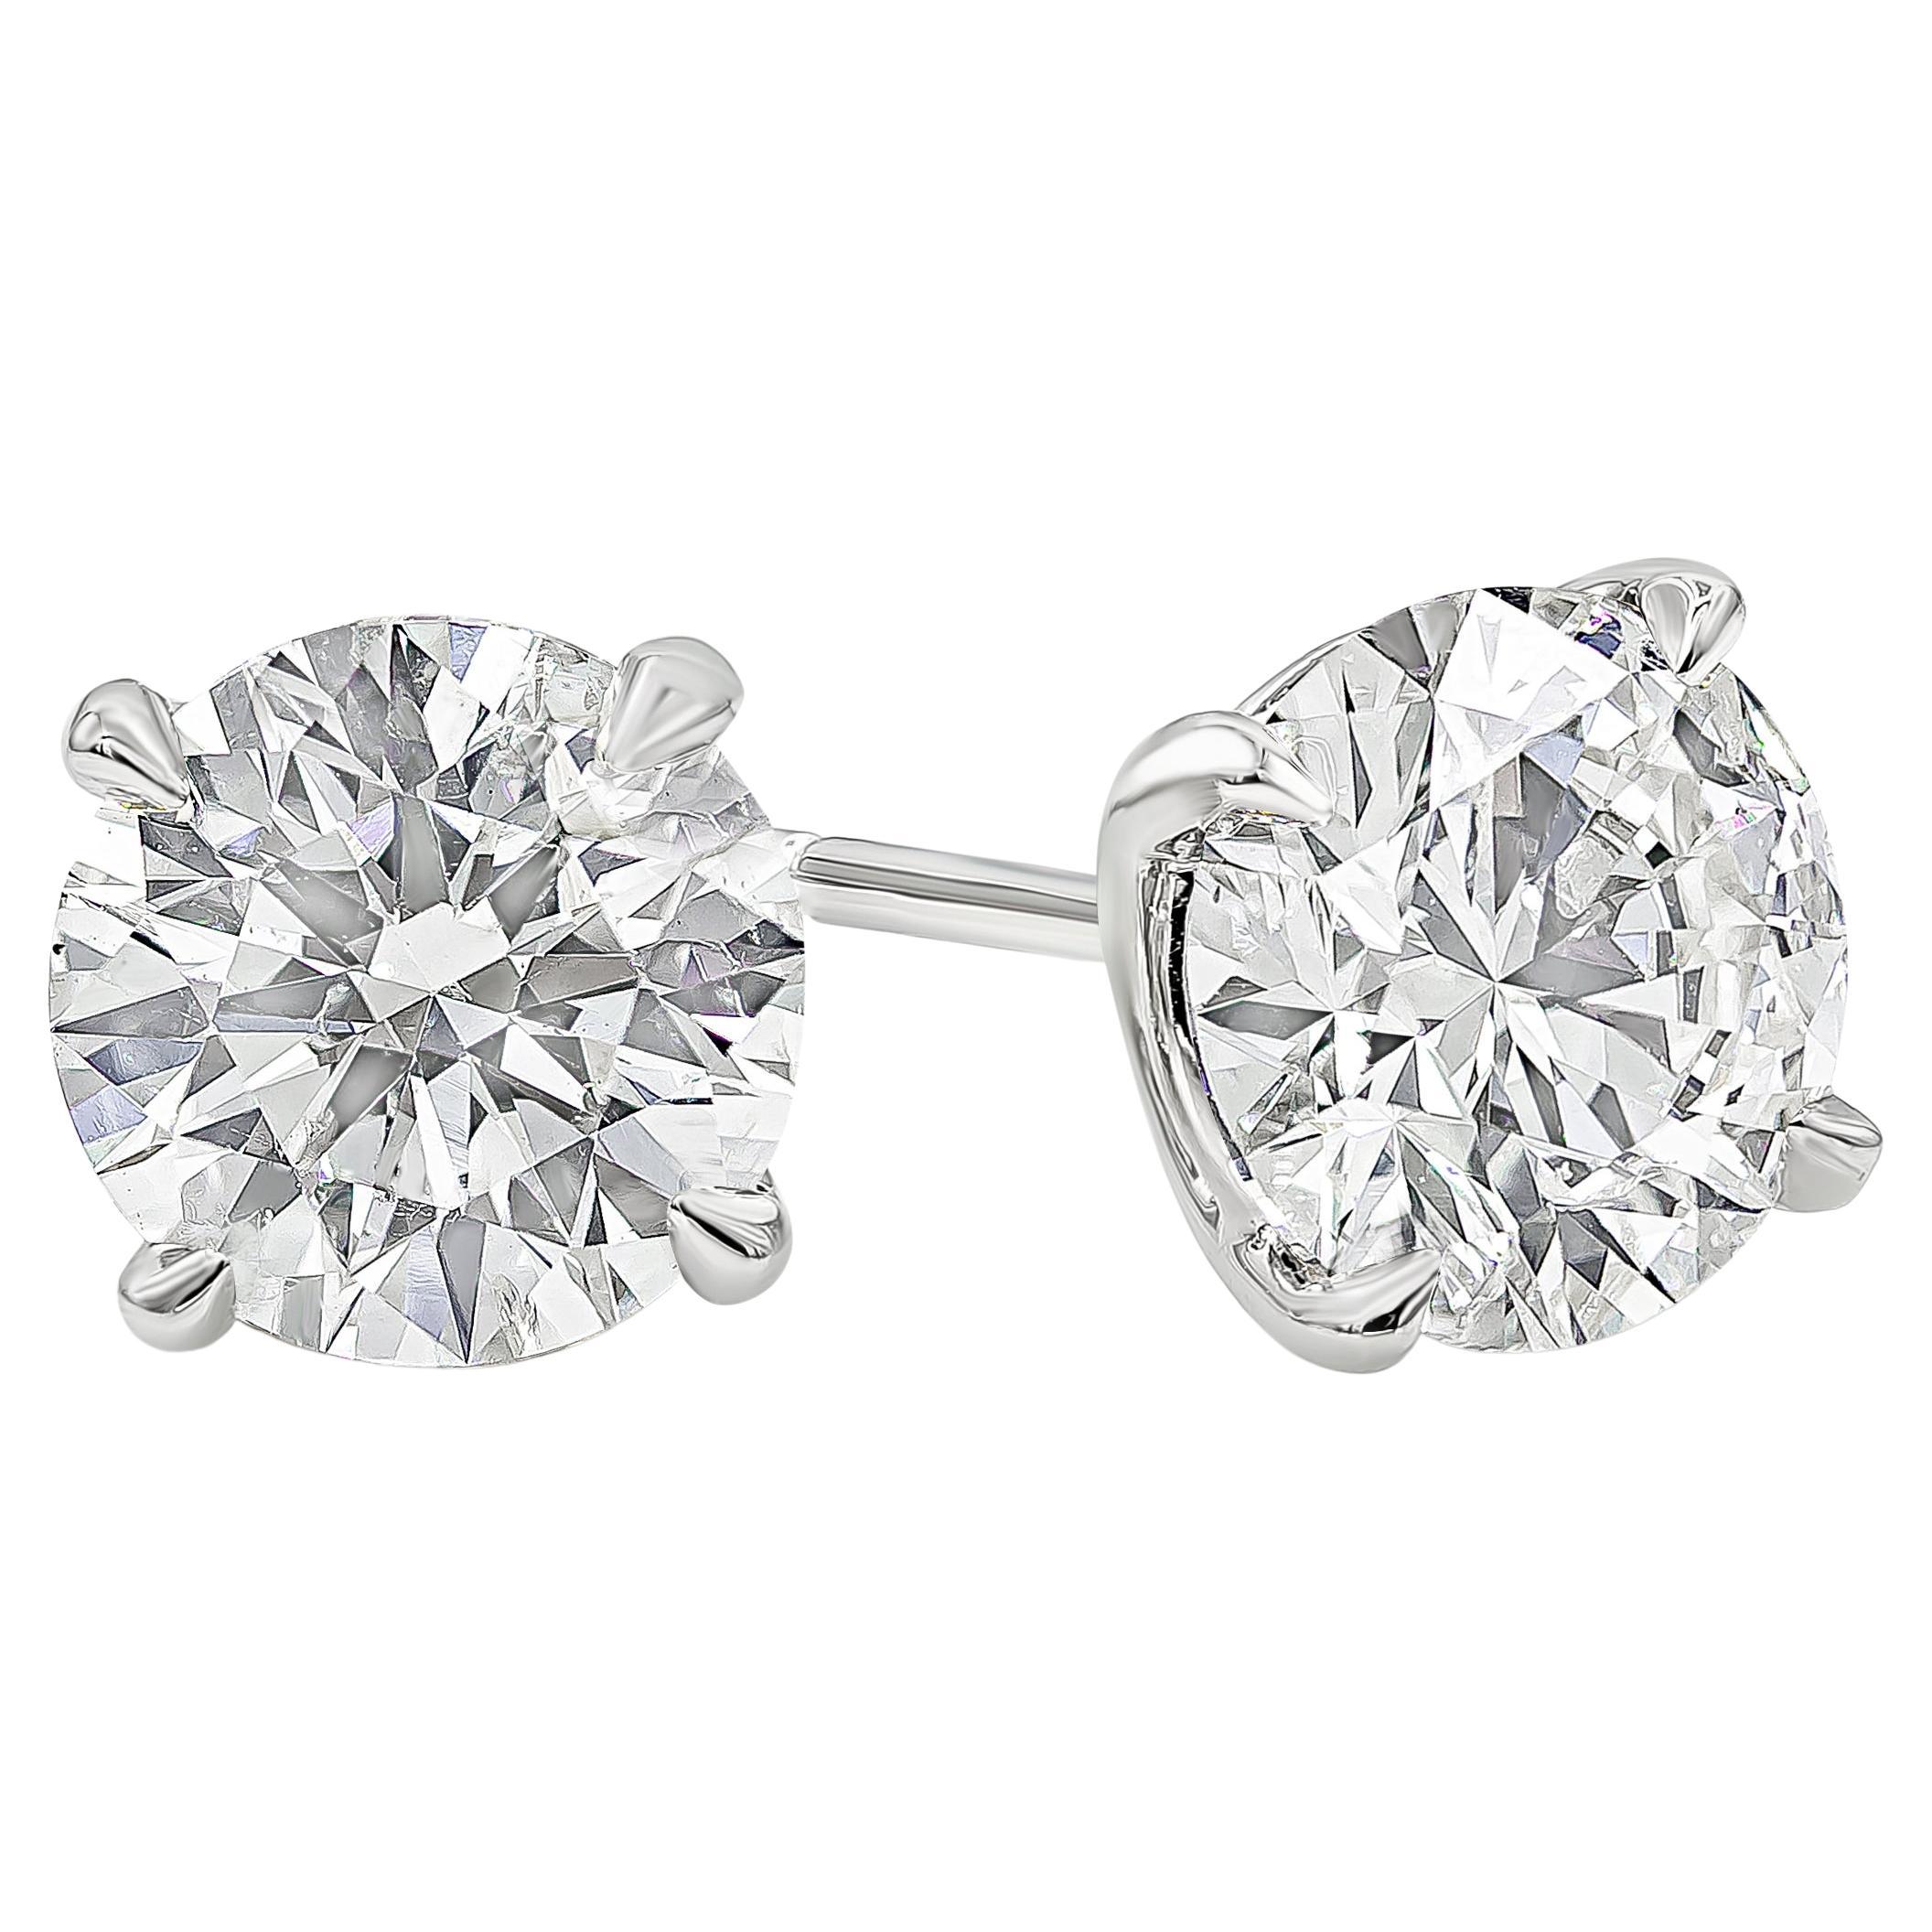 GIA Certified 4.03 Carats Total Brilliant Round Diamond Stud Earrings